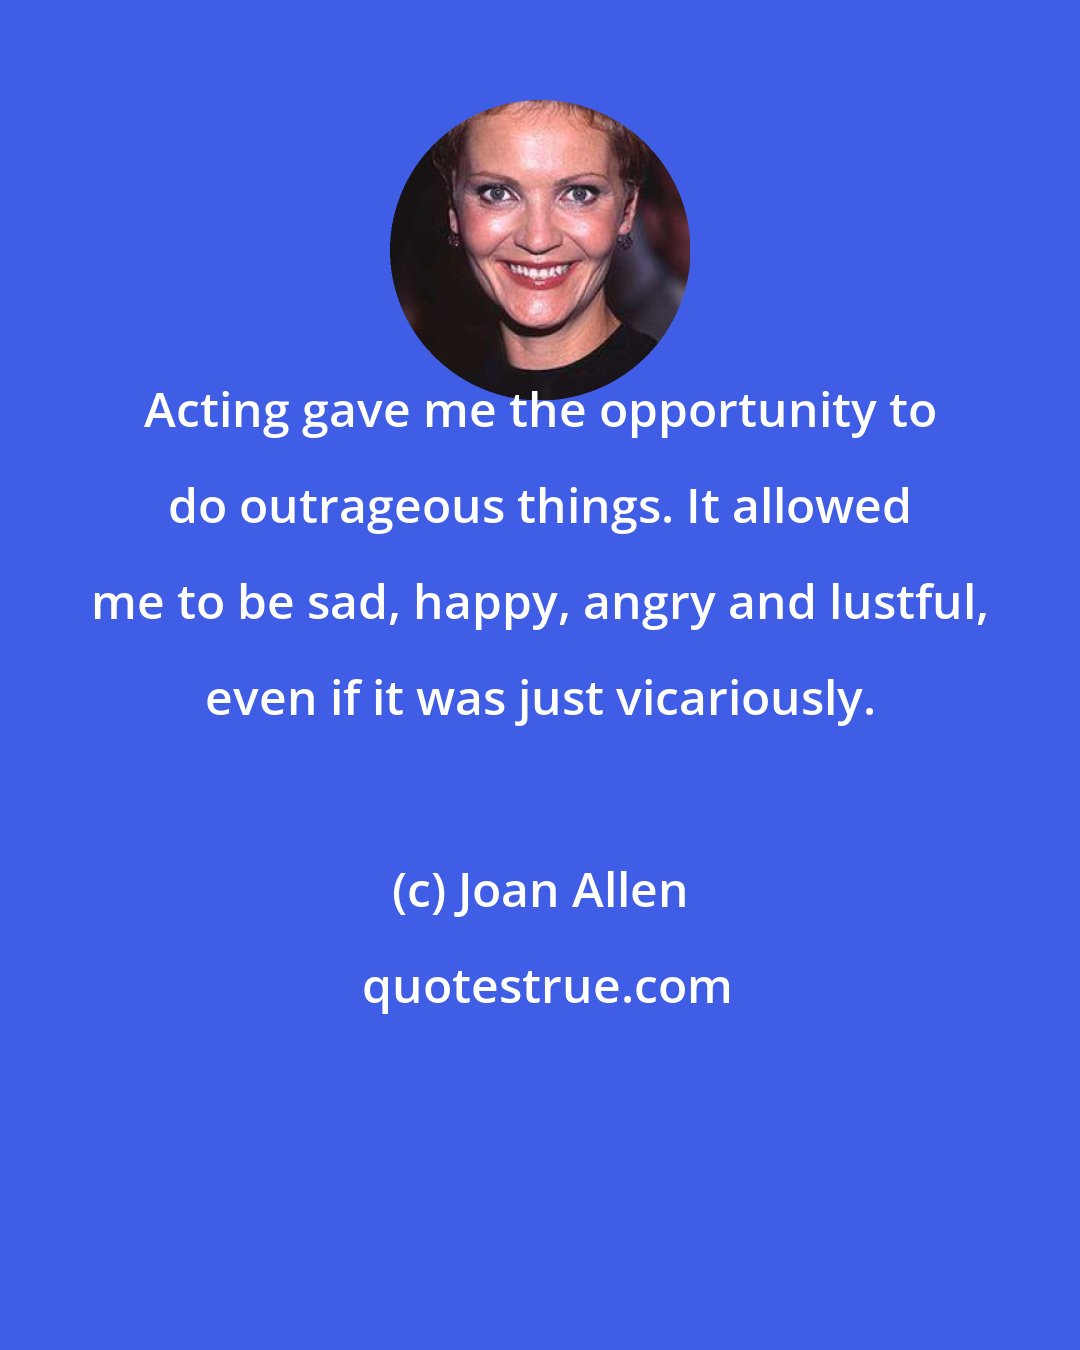 Joan Allen: Acting gave me the opportunity to do outrageous things. It allowed me to be sad, happy, angry and lustful, even if it was just vicariously.